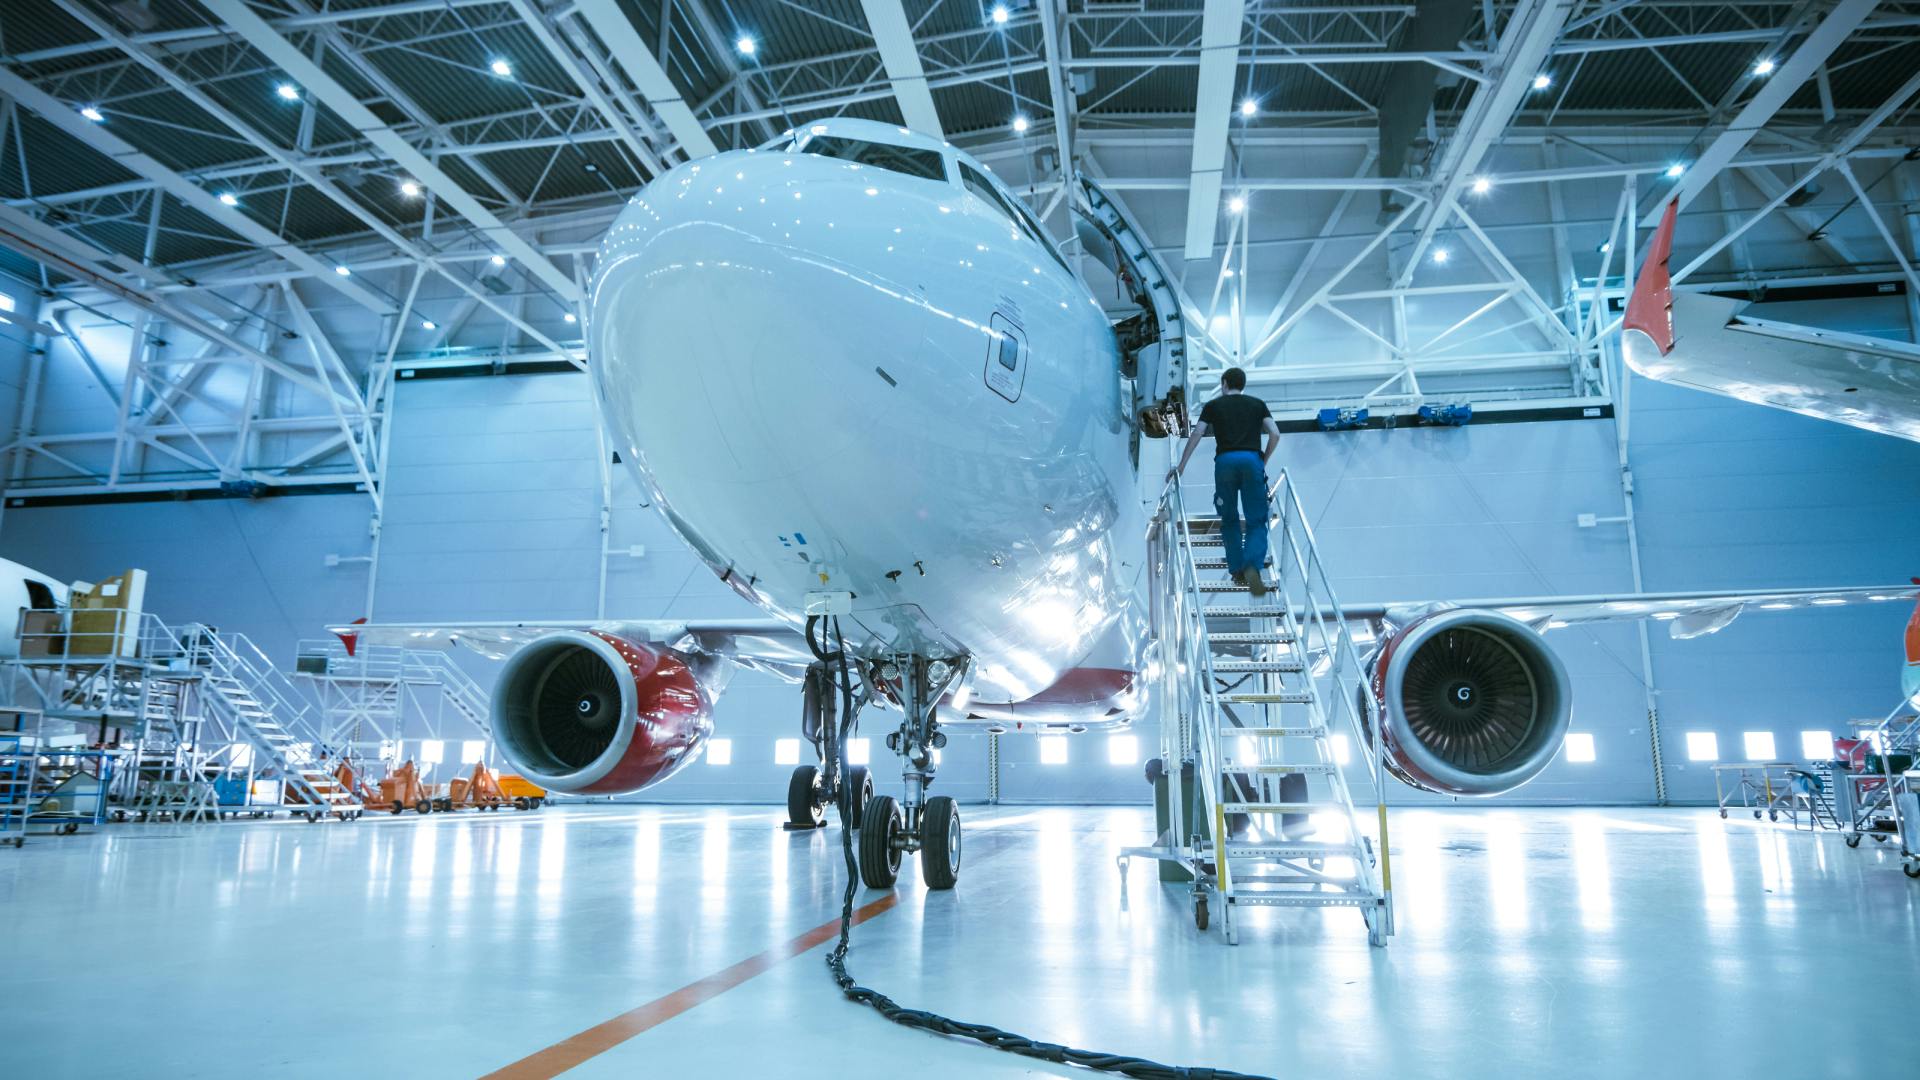 A commercial aircraft being serviced in a hangar.